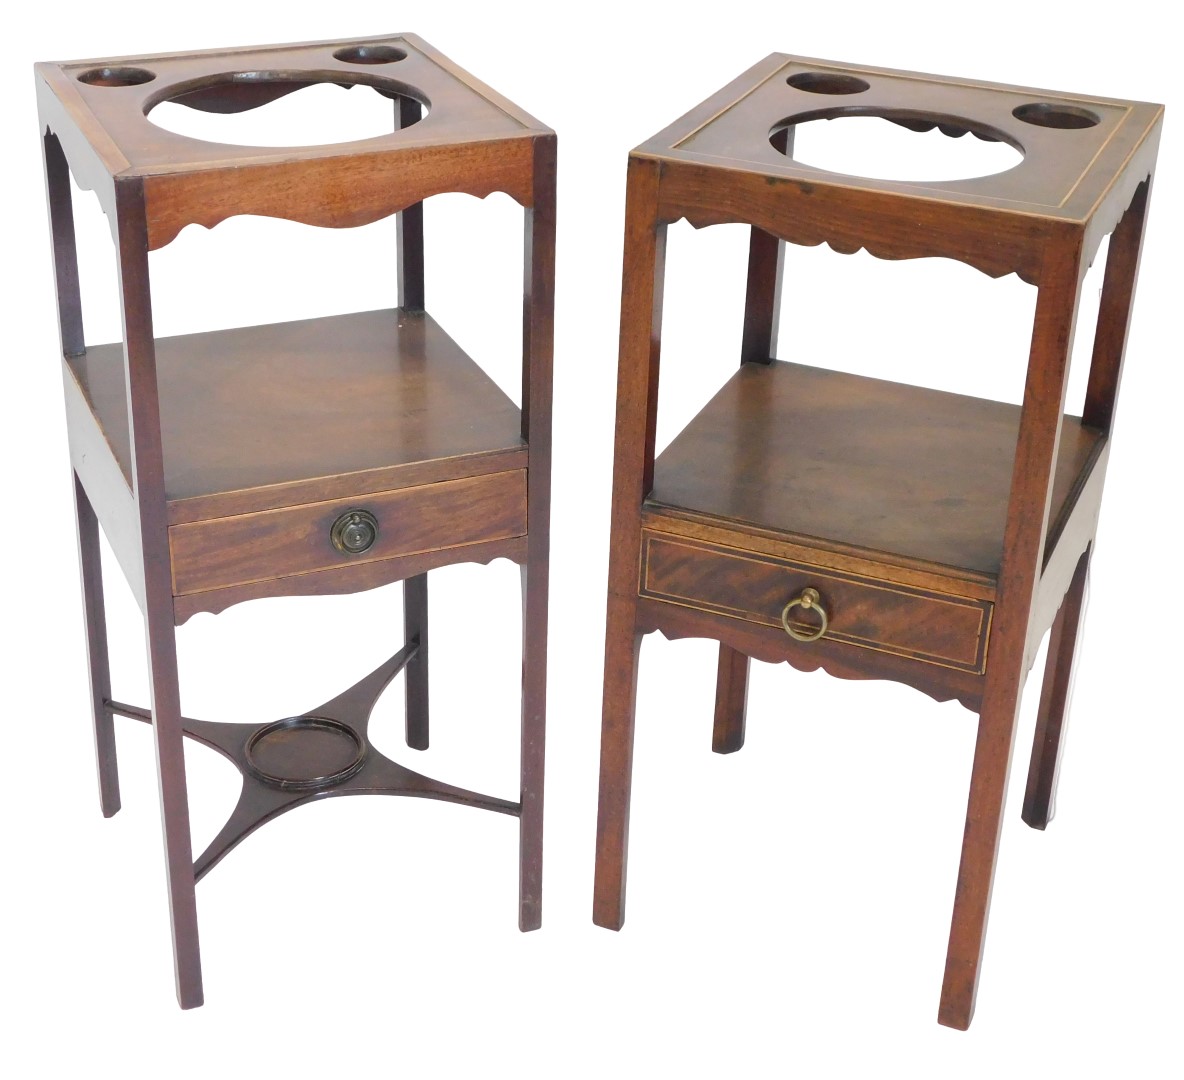 Two similar 19thC mahogany washstands, each square top with three recesses, on plain supports, with